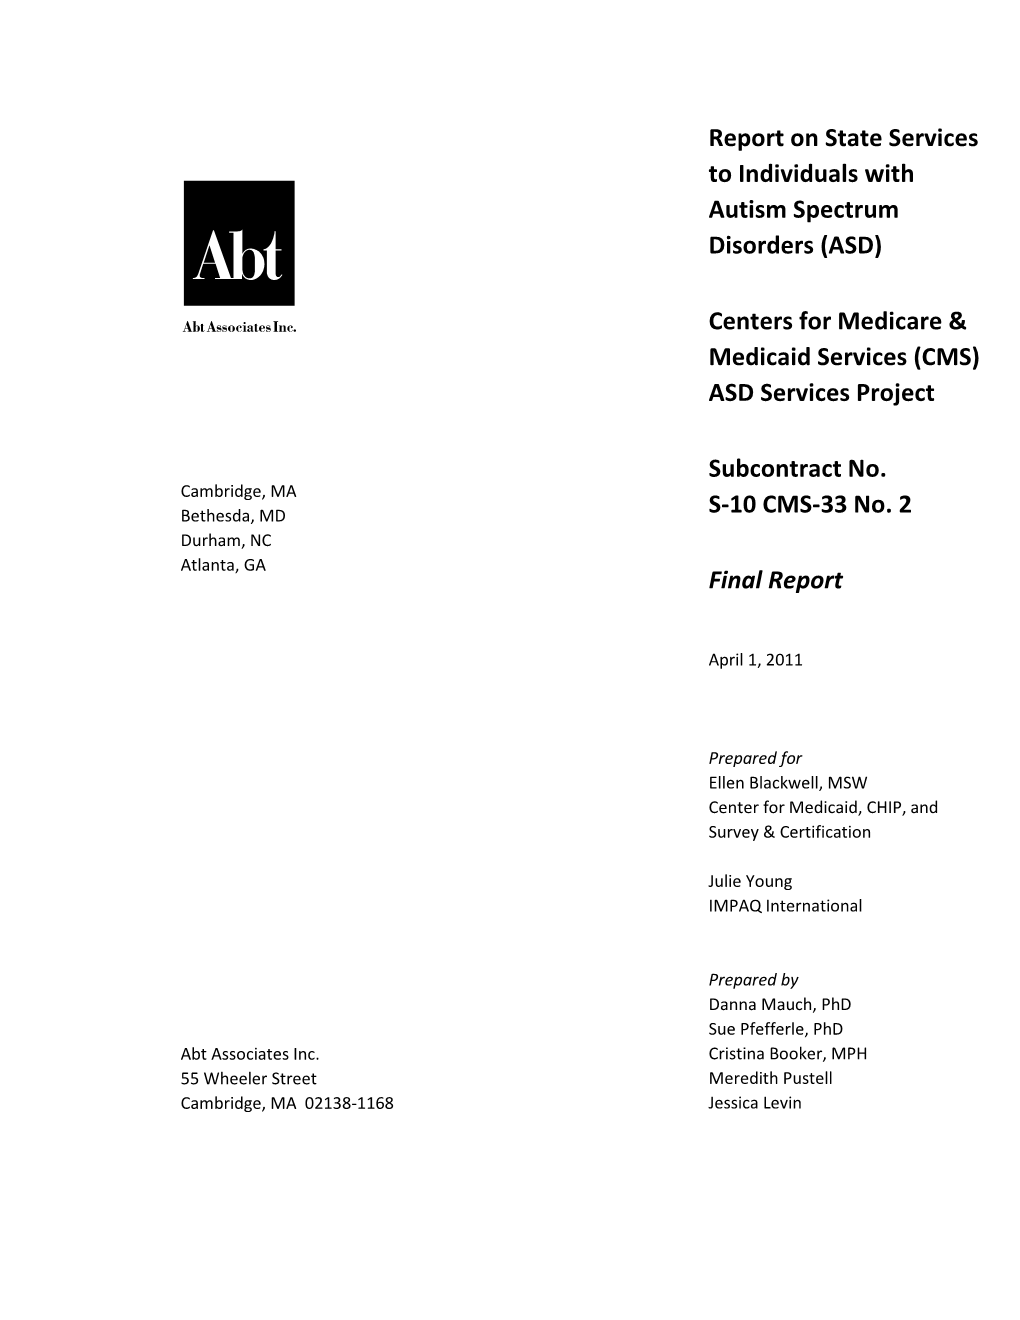 Report on State Services to Individuals with Autism Spectrum Disorders (ASD)